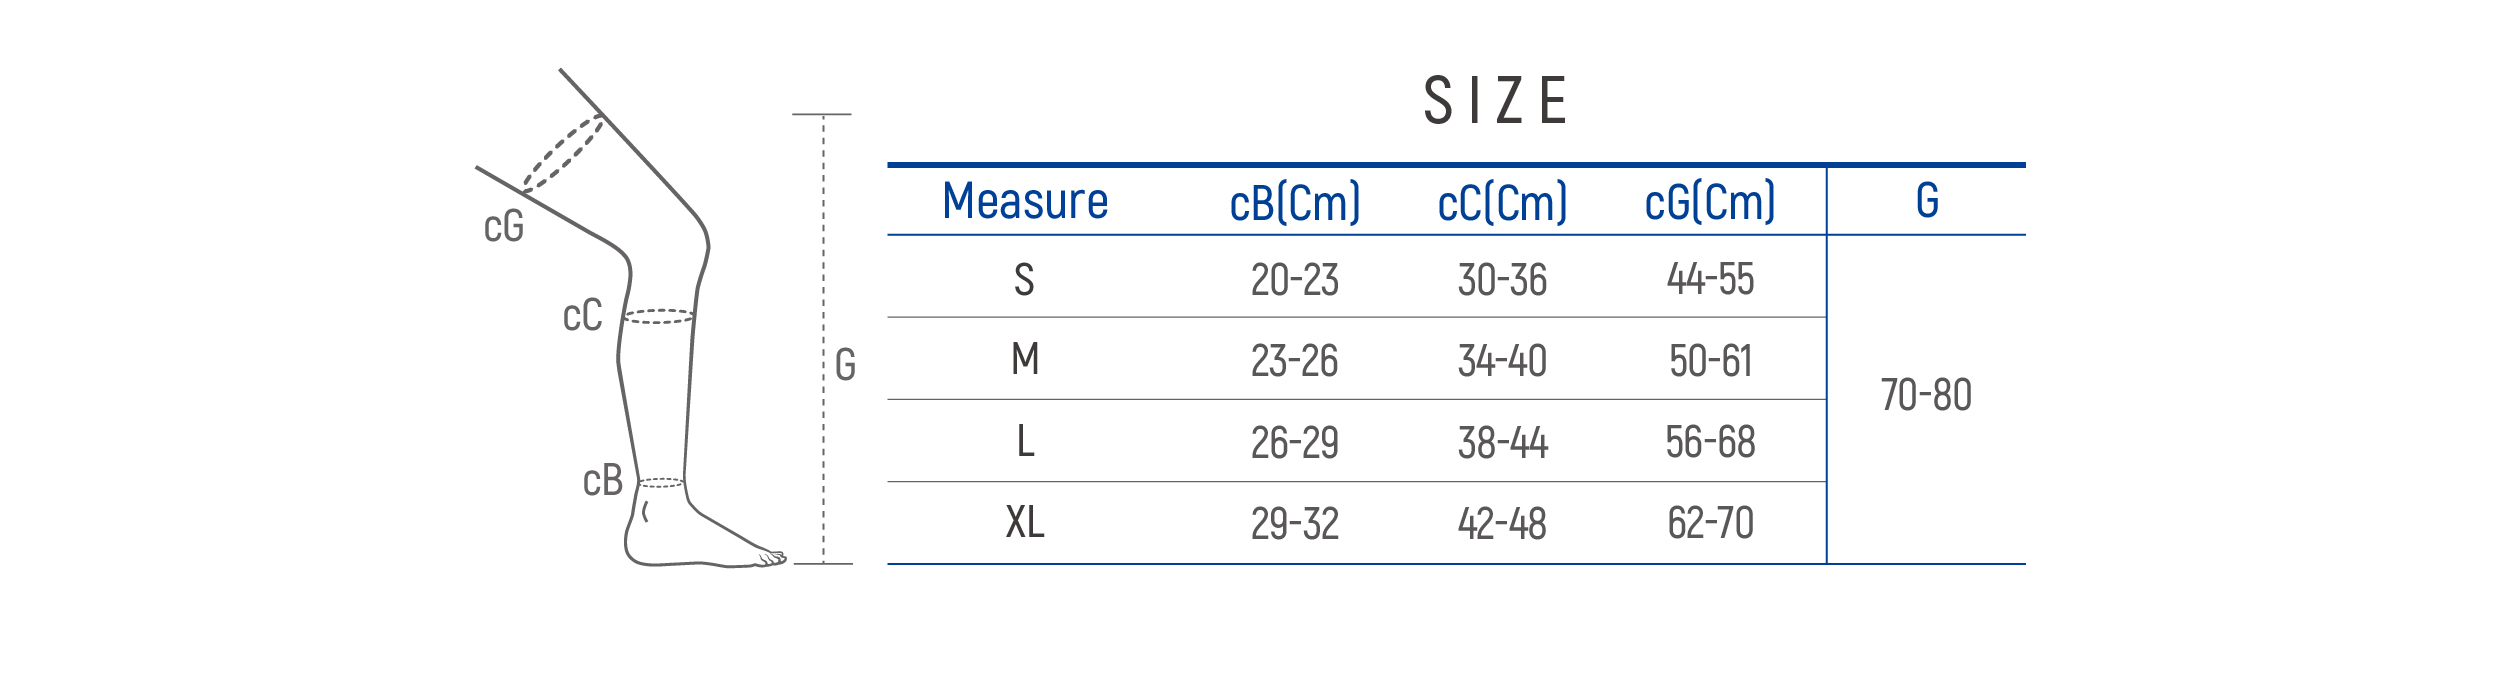 DR-A062 Size table image